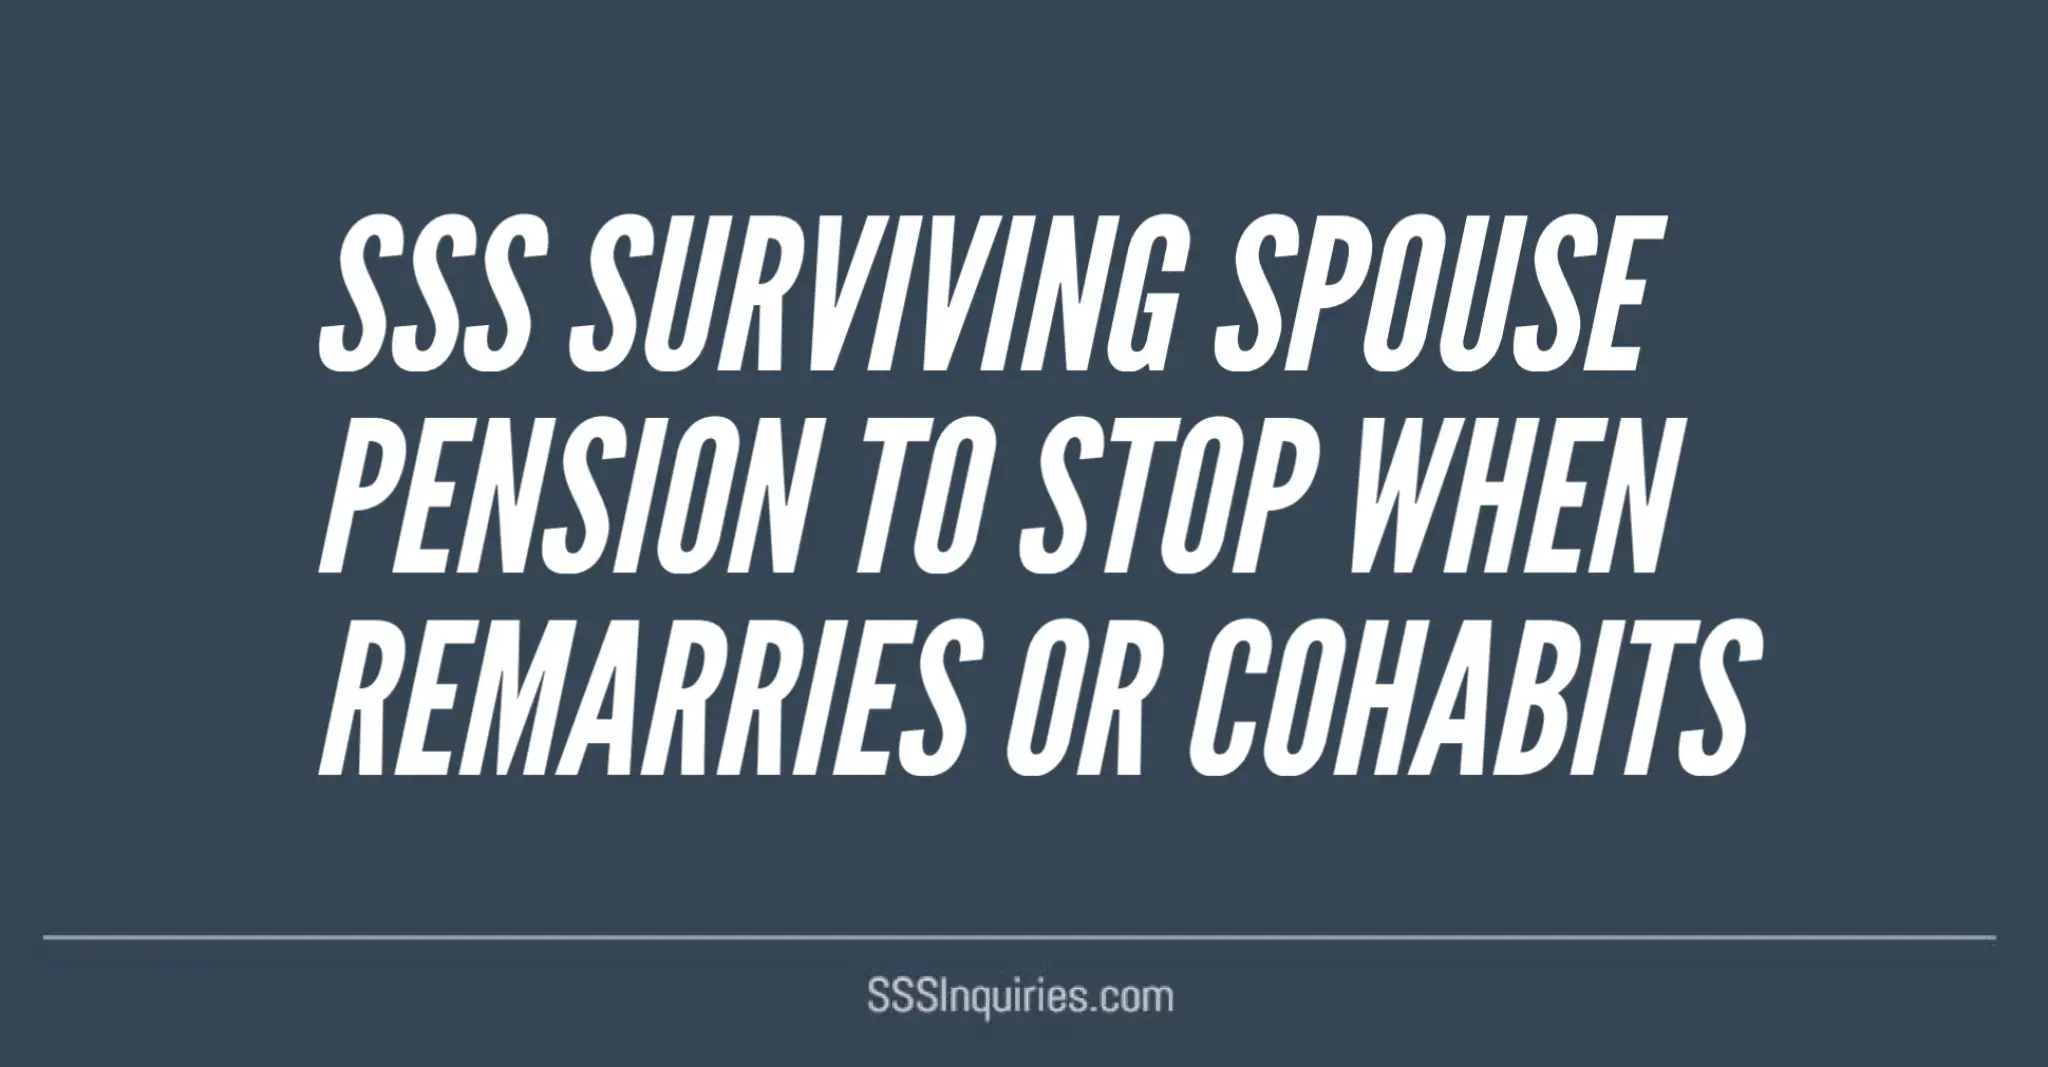 SSS Surviving Spouse Pension to stop when remarries or cohabits